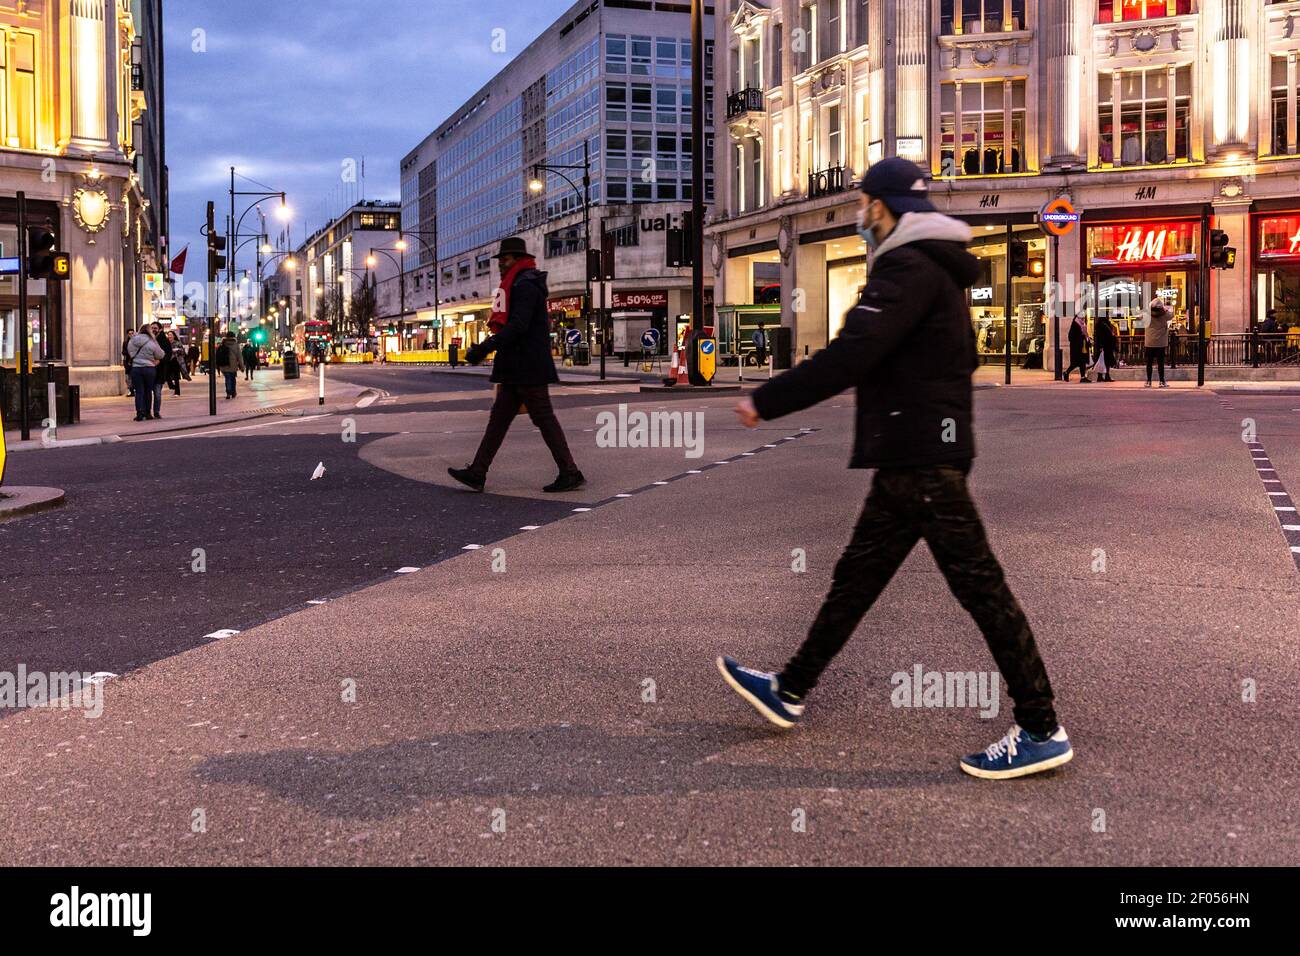 London, UK, March 6, 2021. Commuters cross Oxford Circus as the sun sets over largely empty streets during an ongoing third Coronavirus lockdown. Oxford Street is usually busy with crowds of shoppers. The Prime Minister Boris Johnson has set a road map on easing the restrictions. Credit: Dominika Zarzycka/Alamy Live News Stock Photo